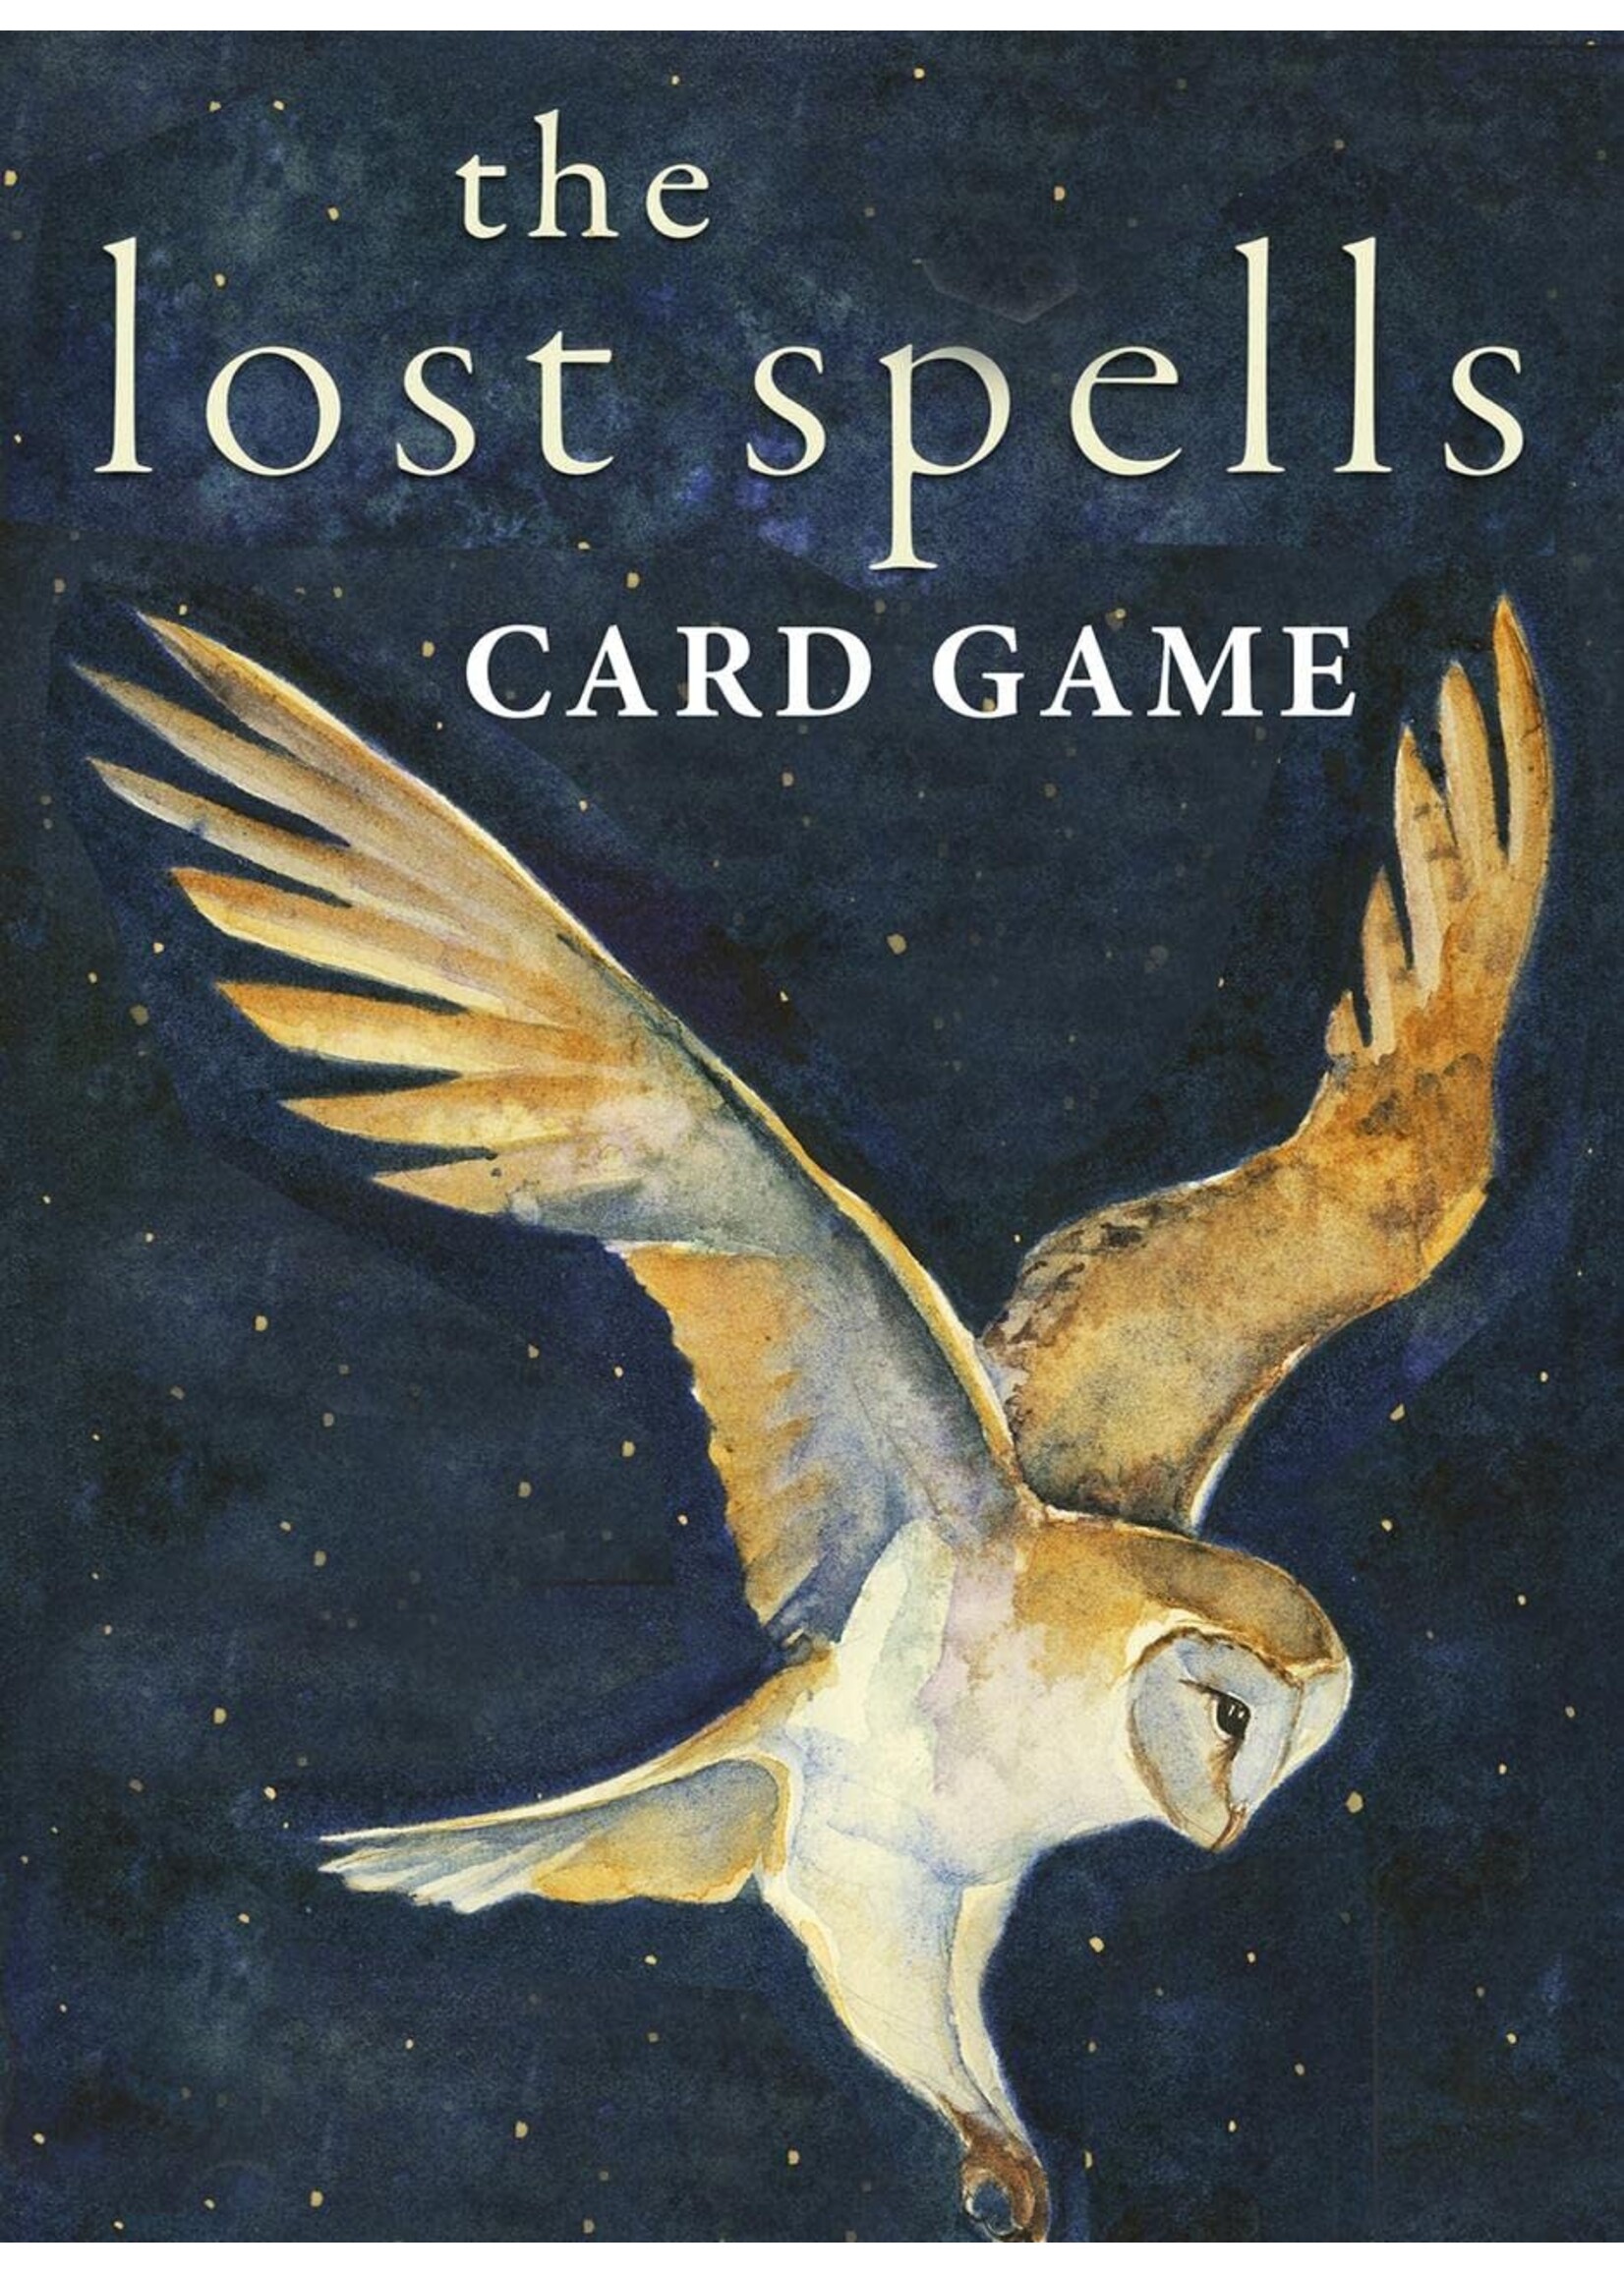 Card/Game The Lost Spells